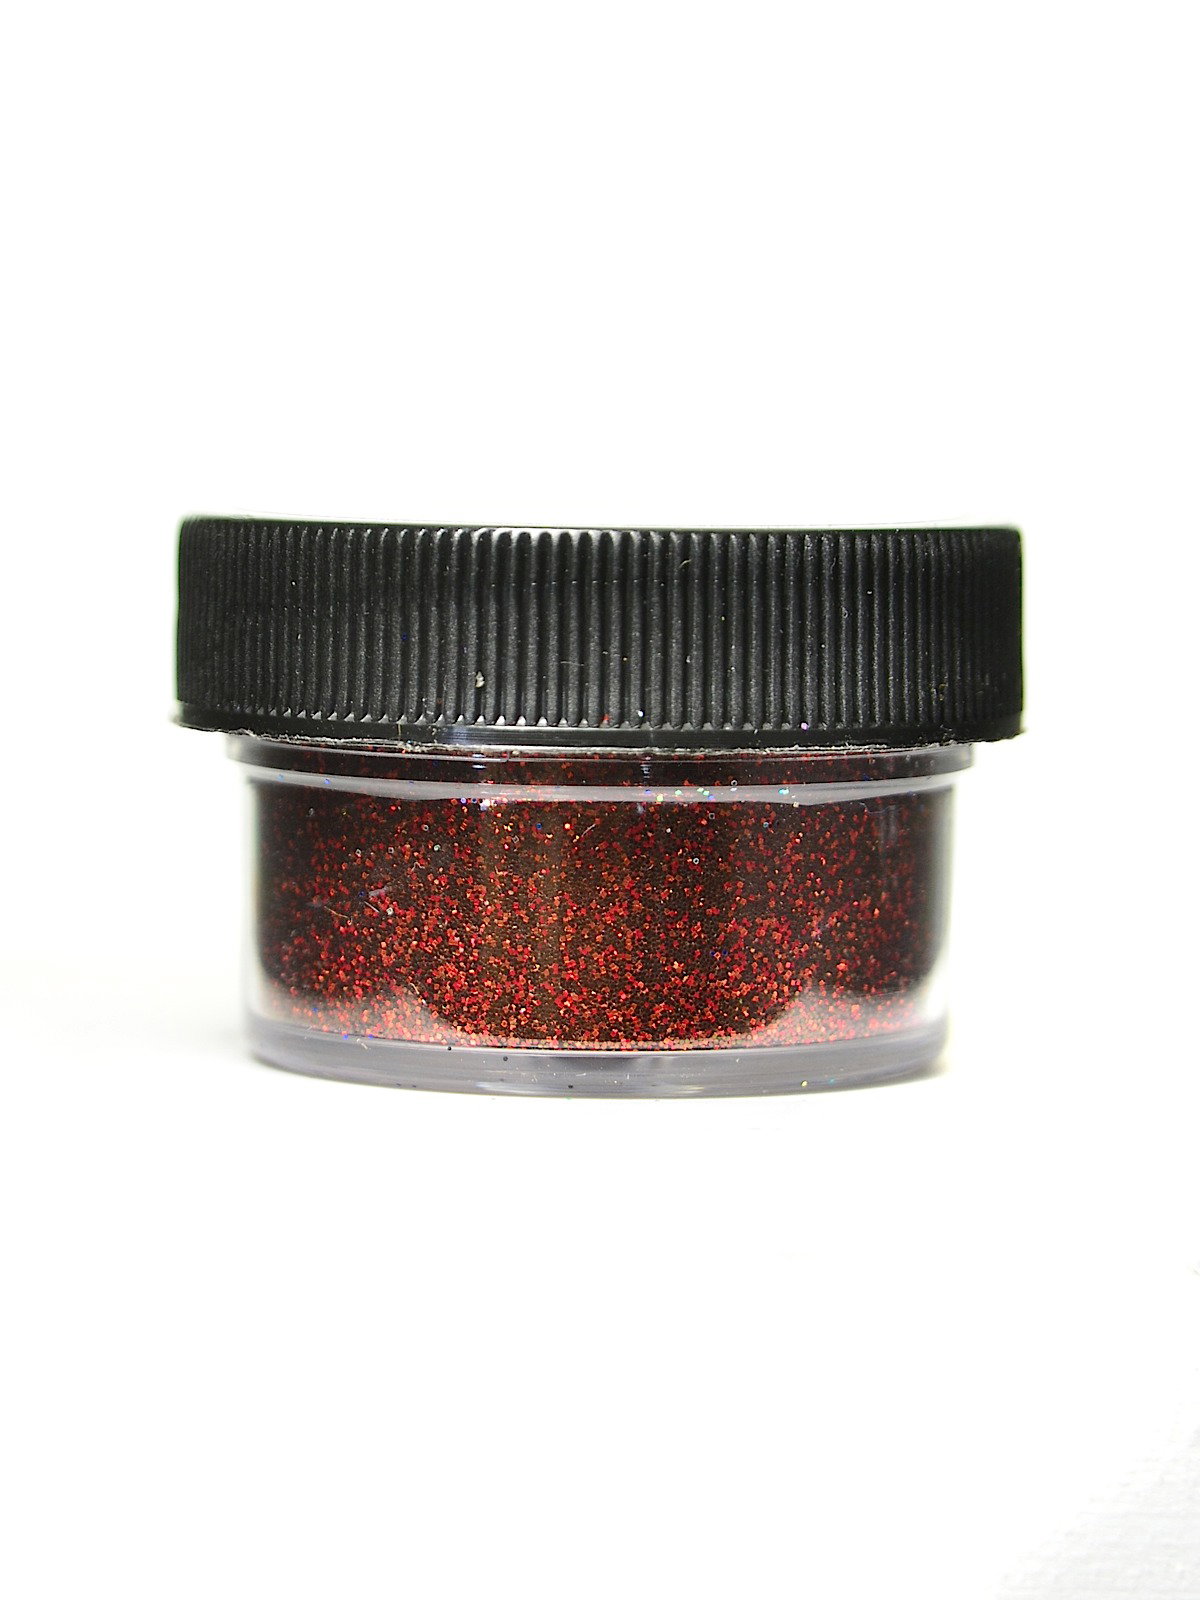 Pacific ~ Ultra Fine Loose Glitter || 3g Pot Solvent Resistant